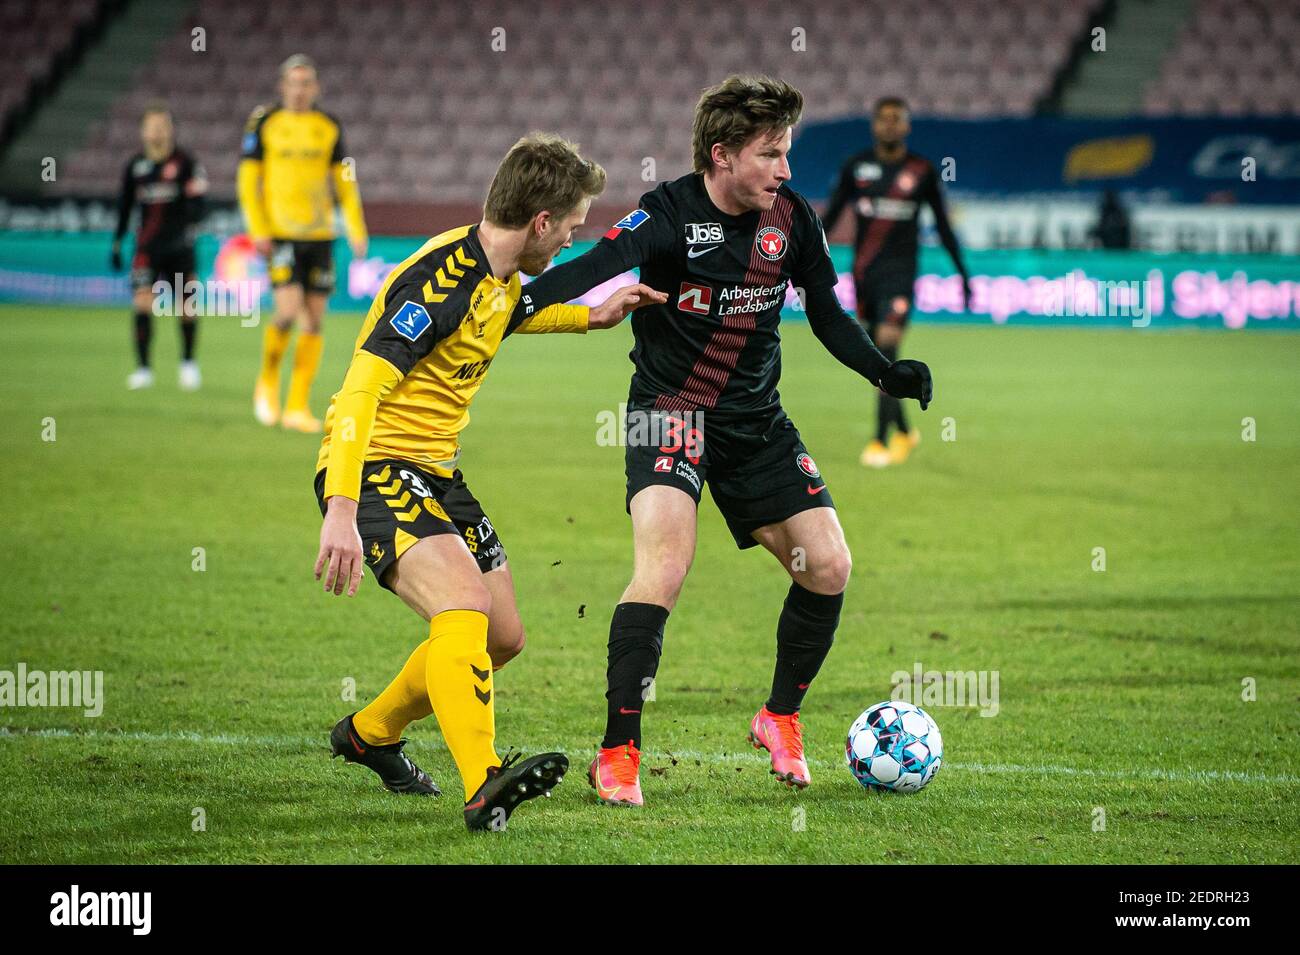 Herning, Denmark. 14th Feb, 2021. Anders Dreyer (36) of FC Midtjylland and Alexander Ludwig (33) of Horsens seen during the 3F Superliga match between FC Midtjylland and AC Horsens at MCH